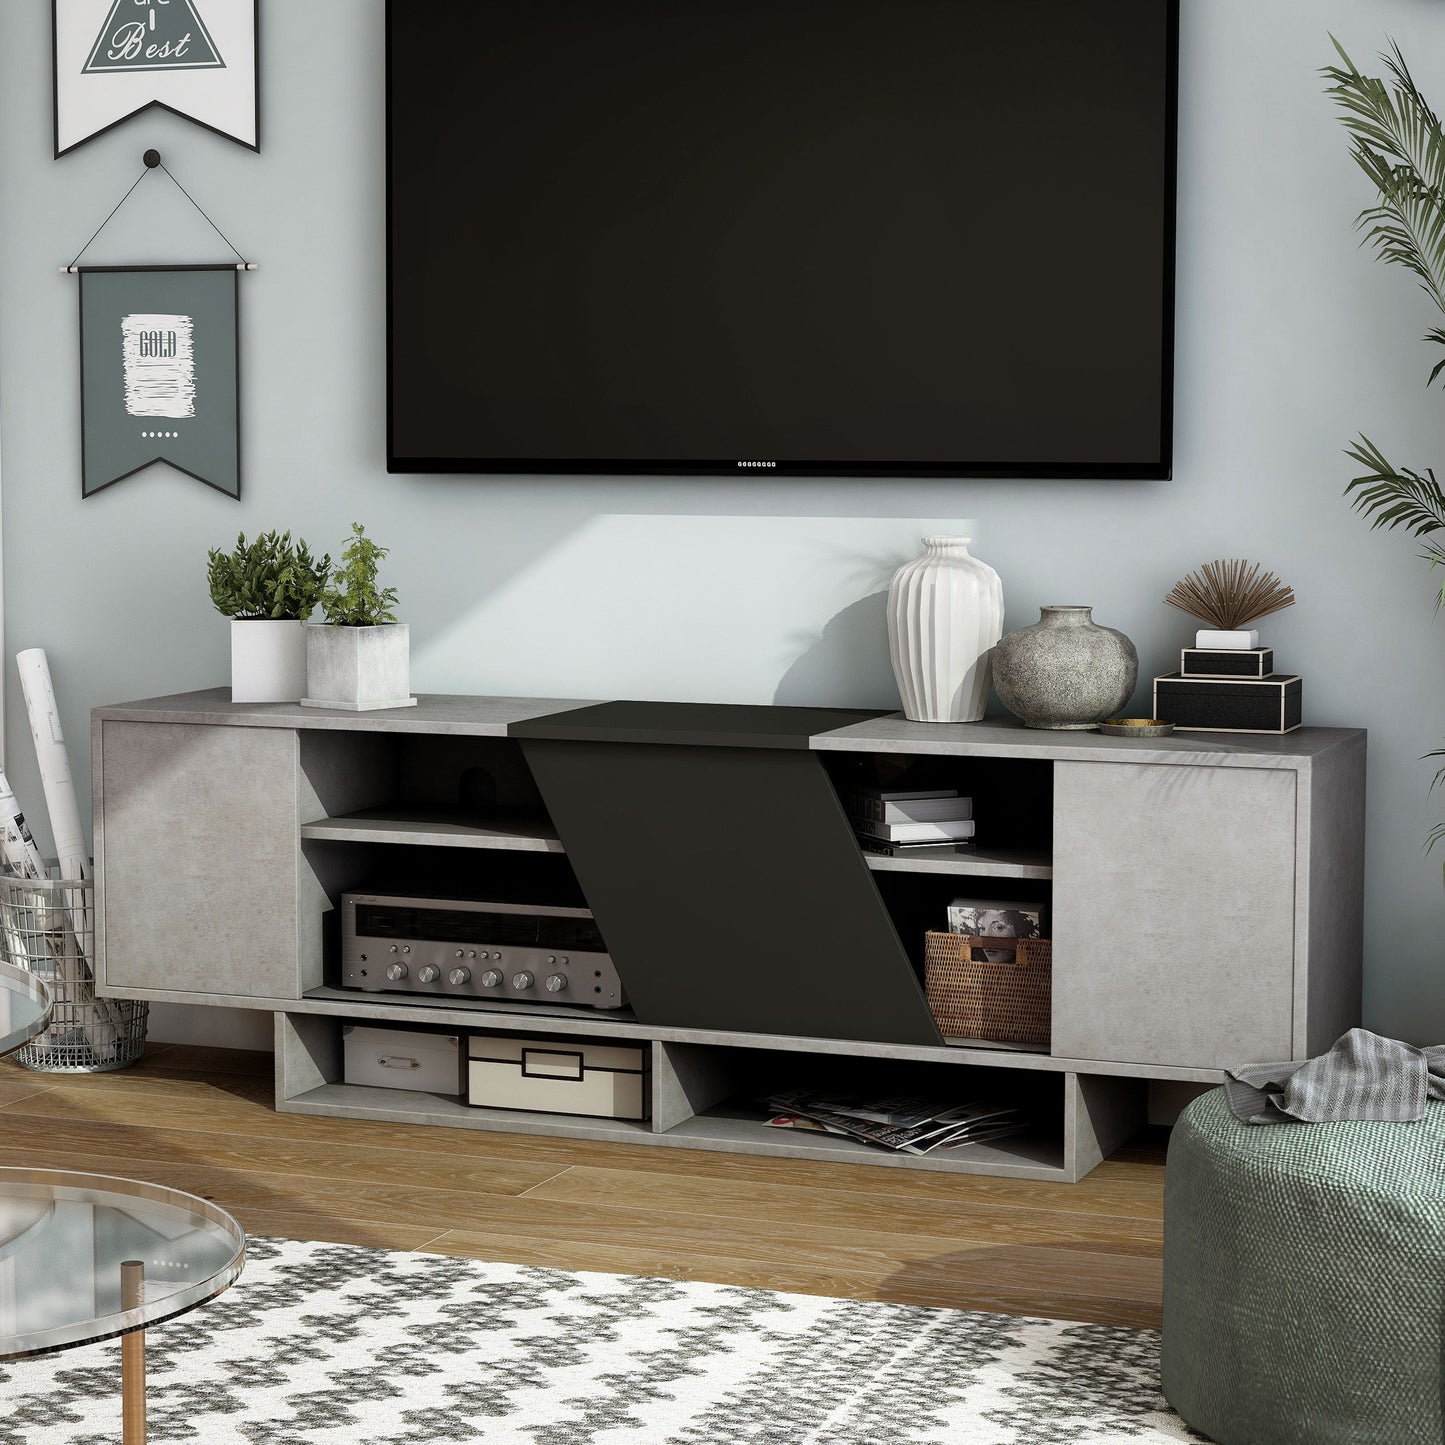 Left angled modern cement gray and black six-shelf TV stand in a living room with accessories